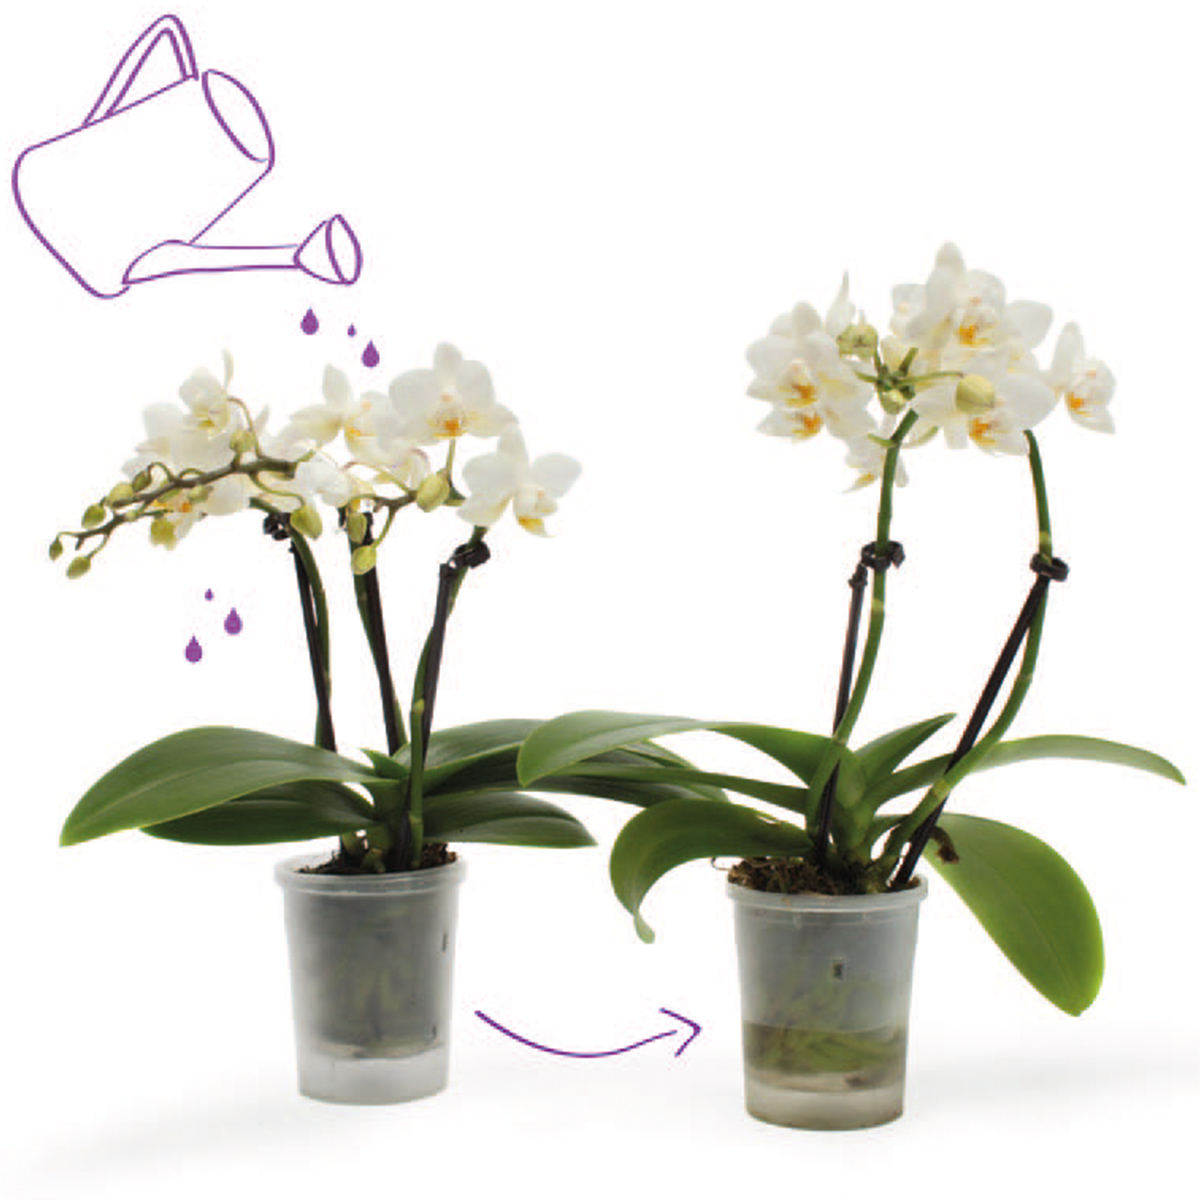 TOTF2021 19 VG Orchids 03